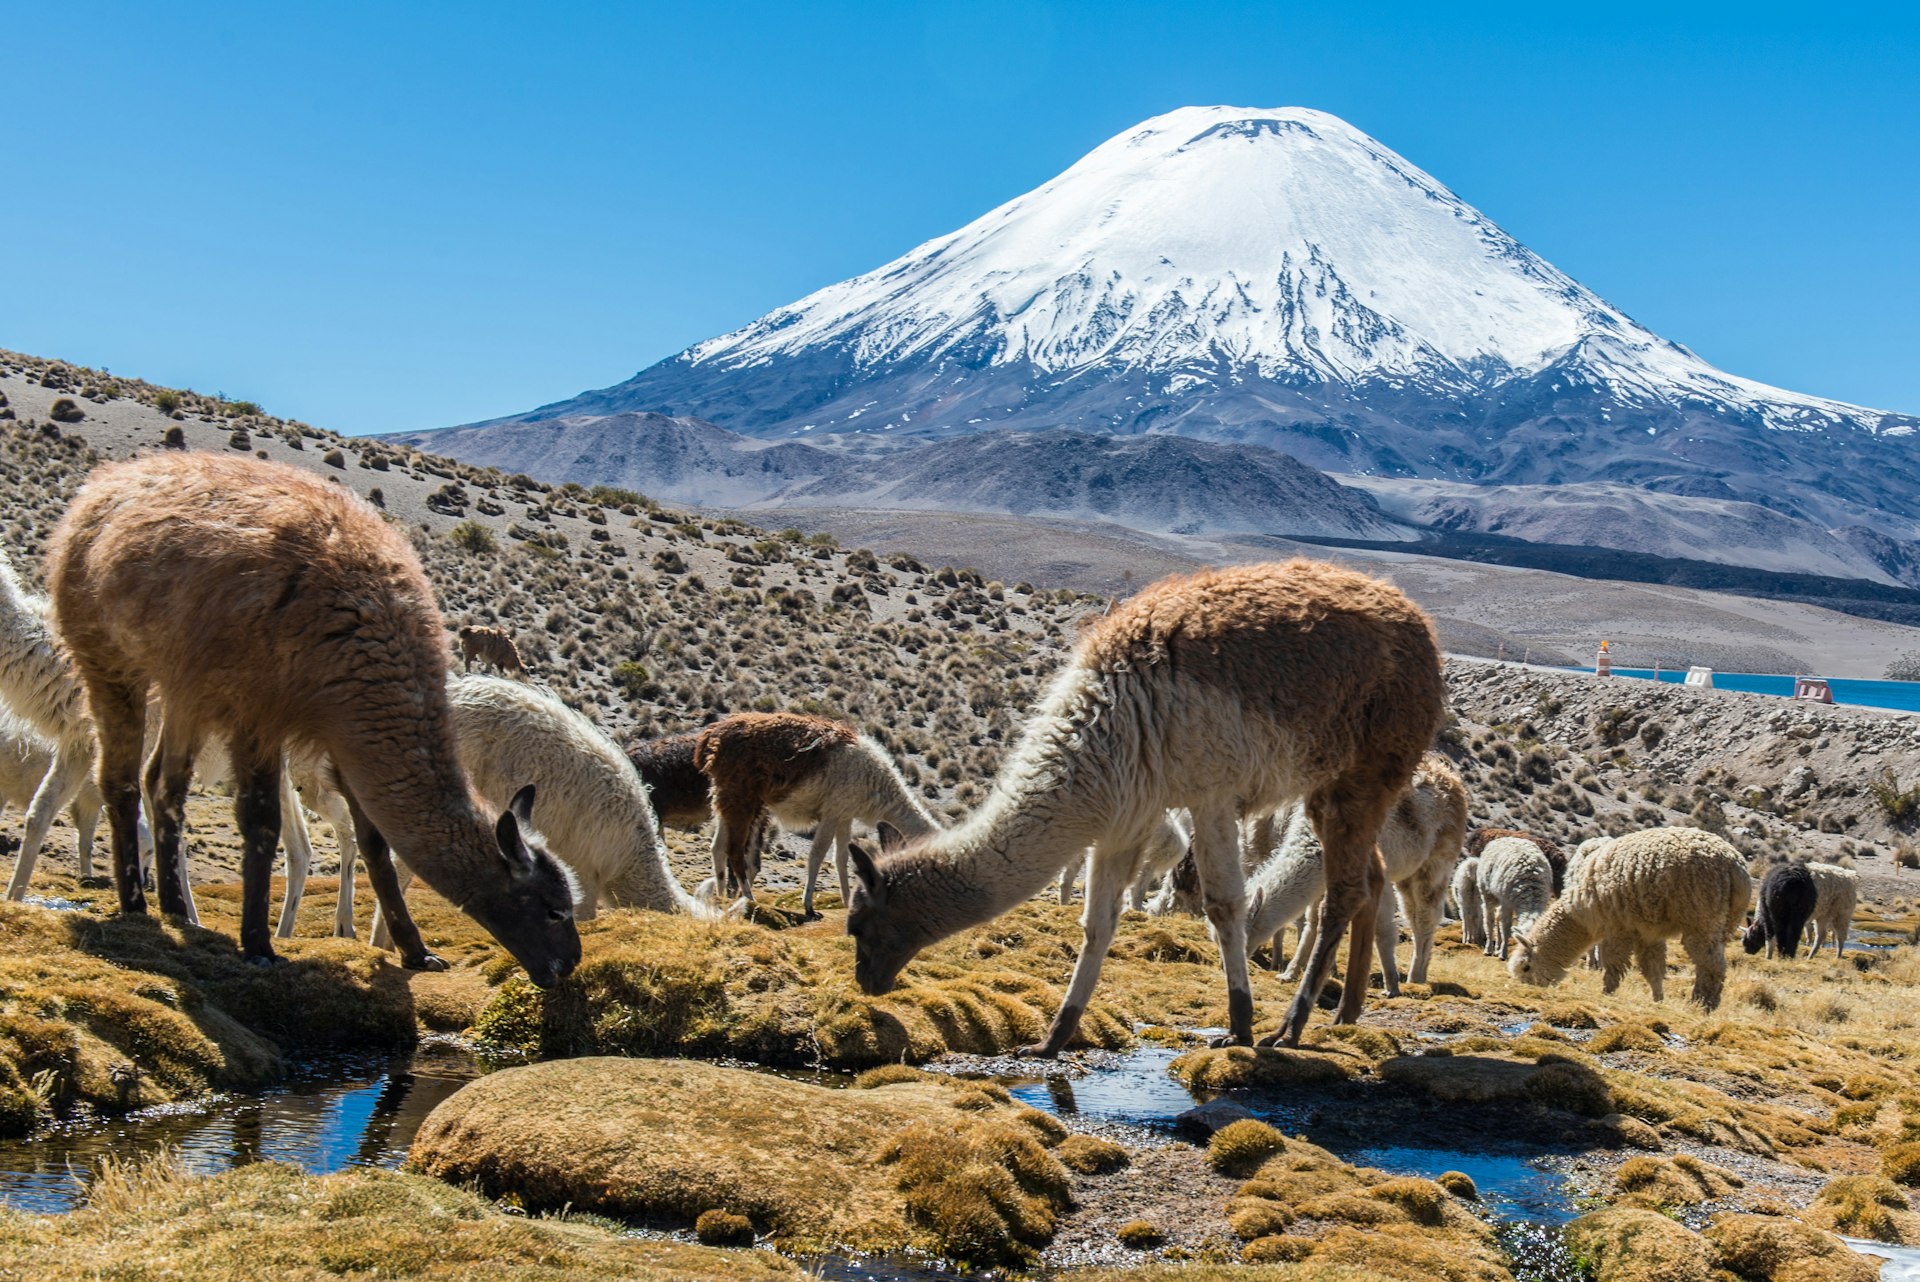 Llamas eating grass in front of a snow-capped volcano at Parque Nacional Lauca